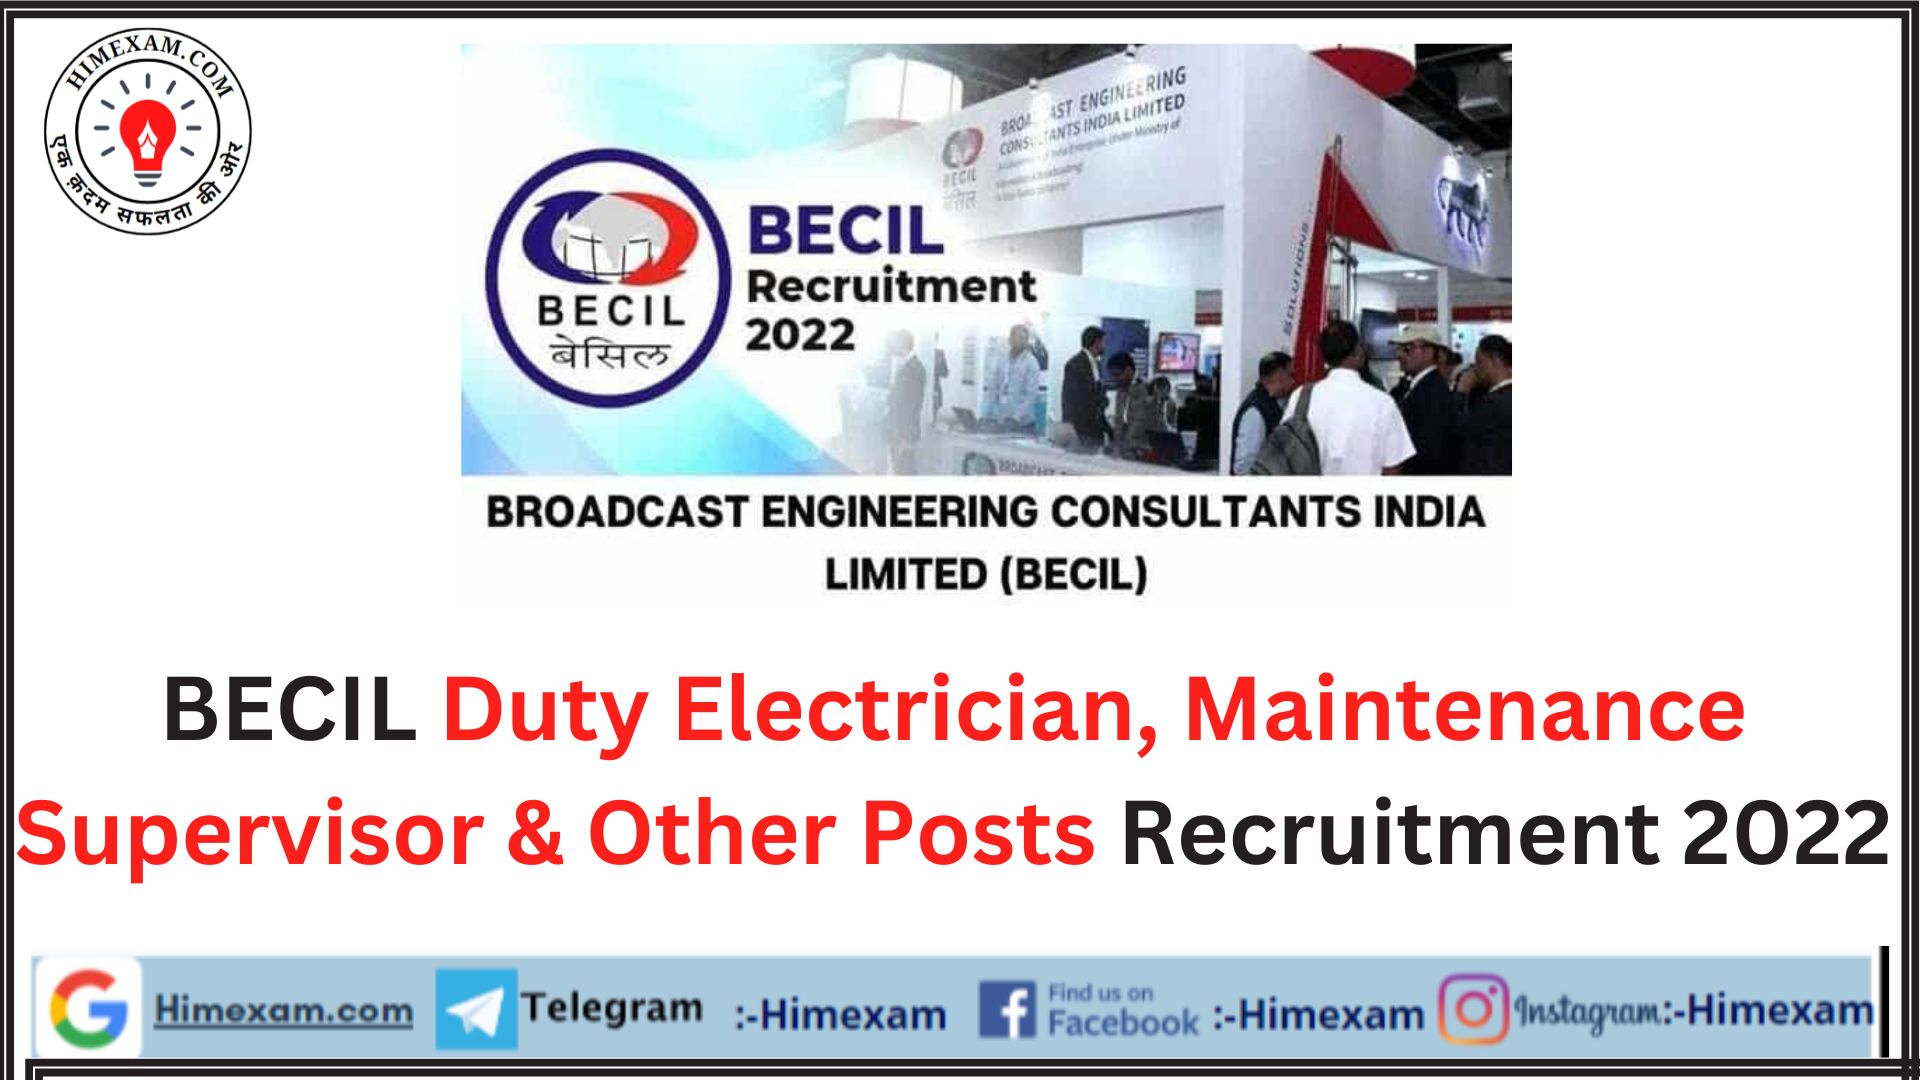 BECIL Duty Electrician, Maintenance Supervisor & Other Posts Recruitment 2022